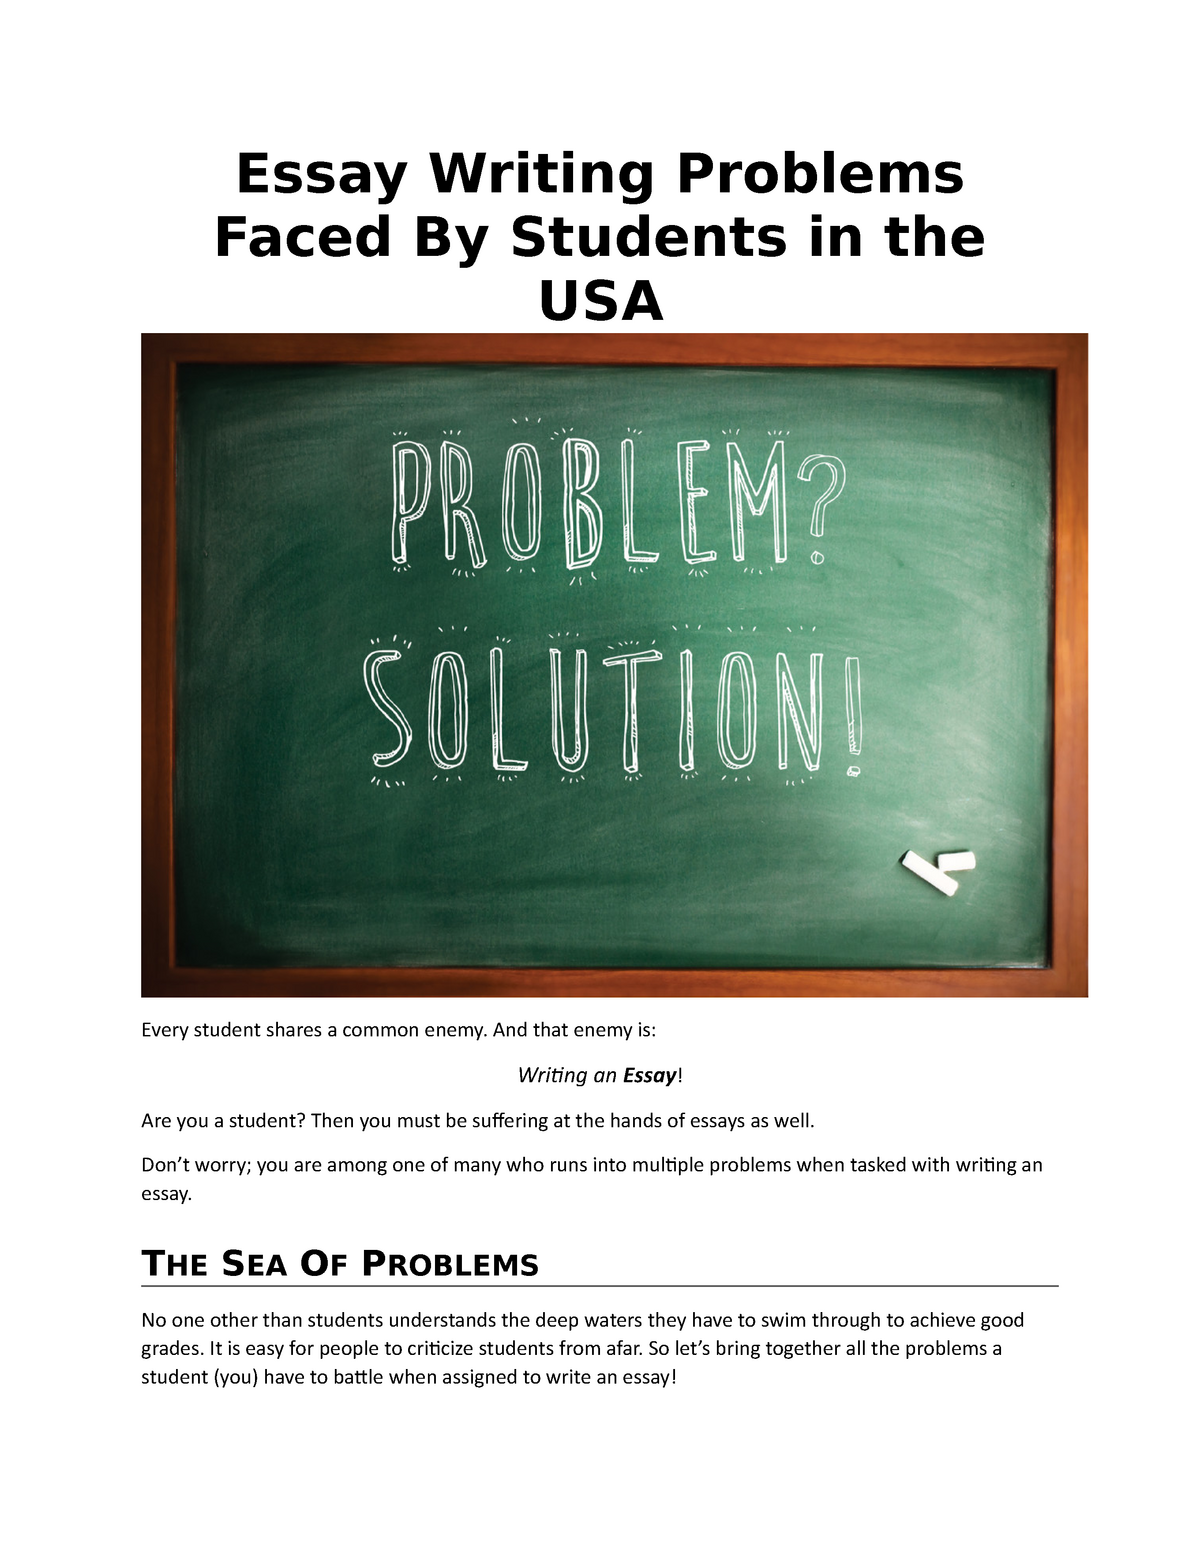 essay on problems faced by students today